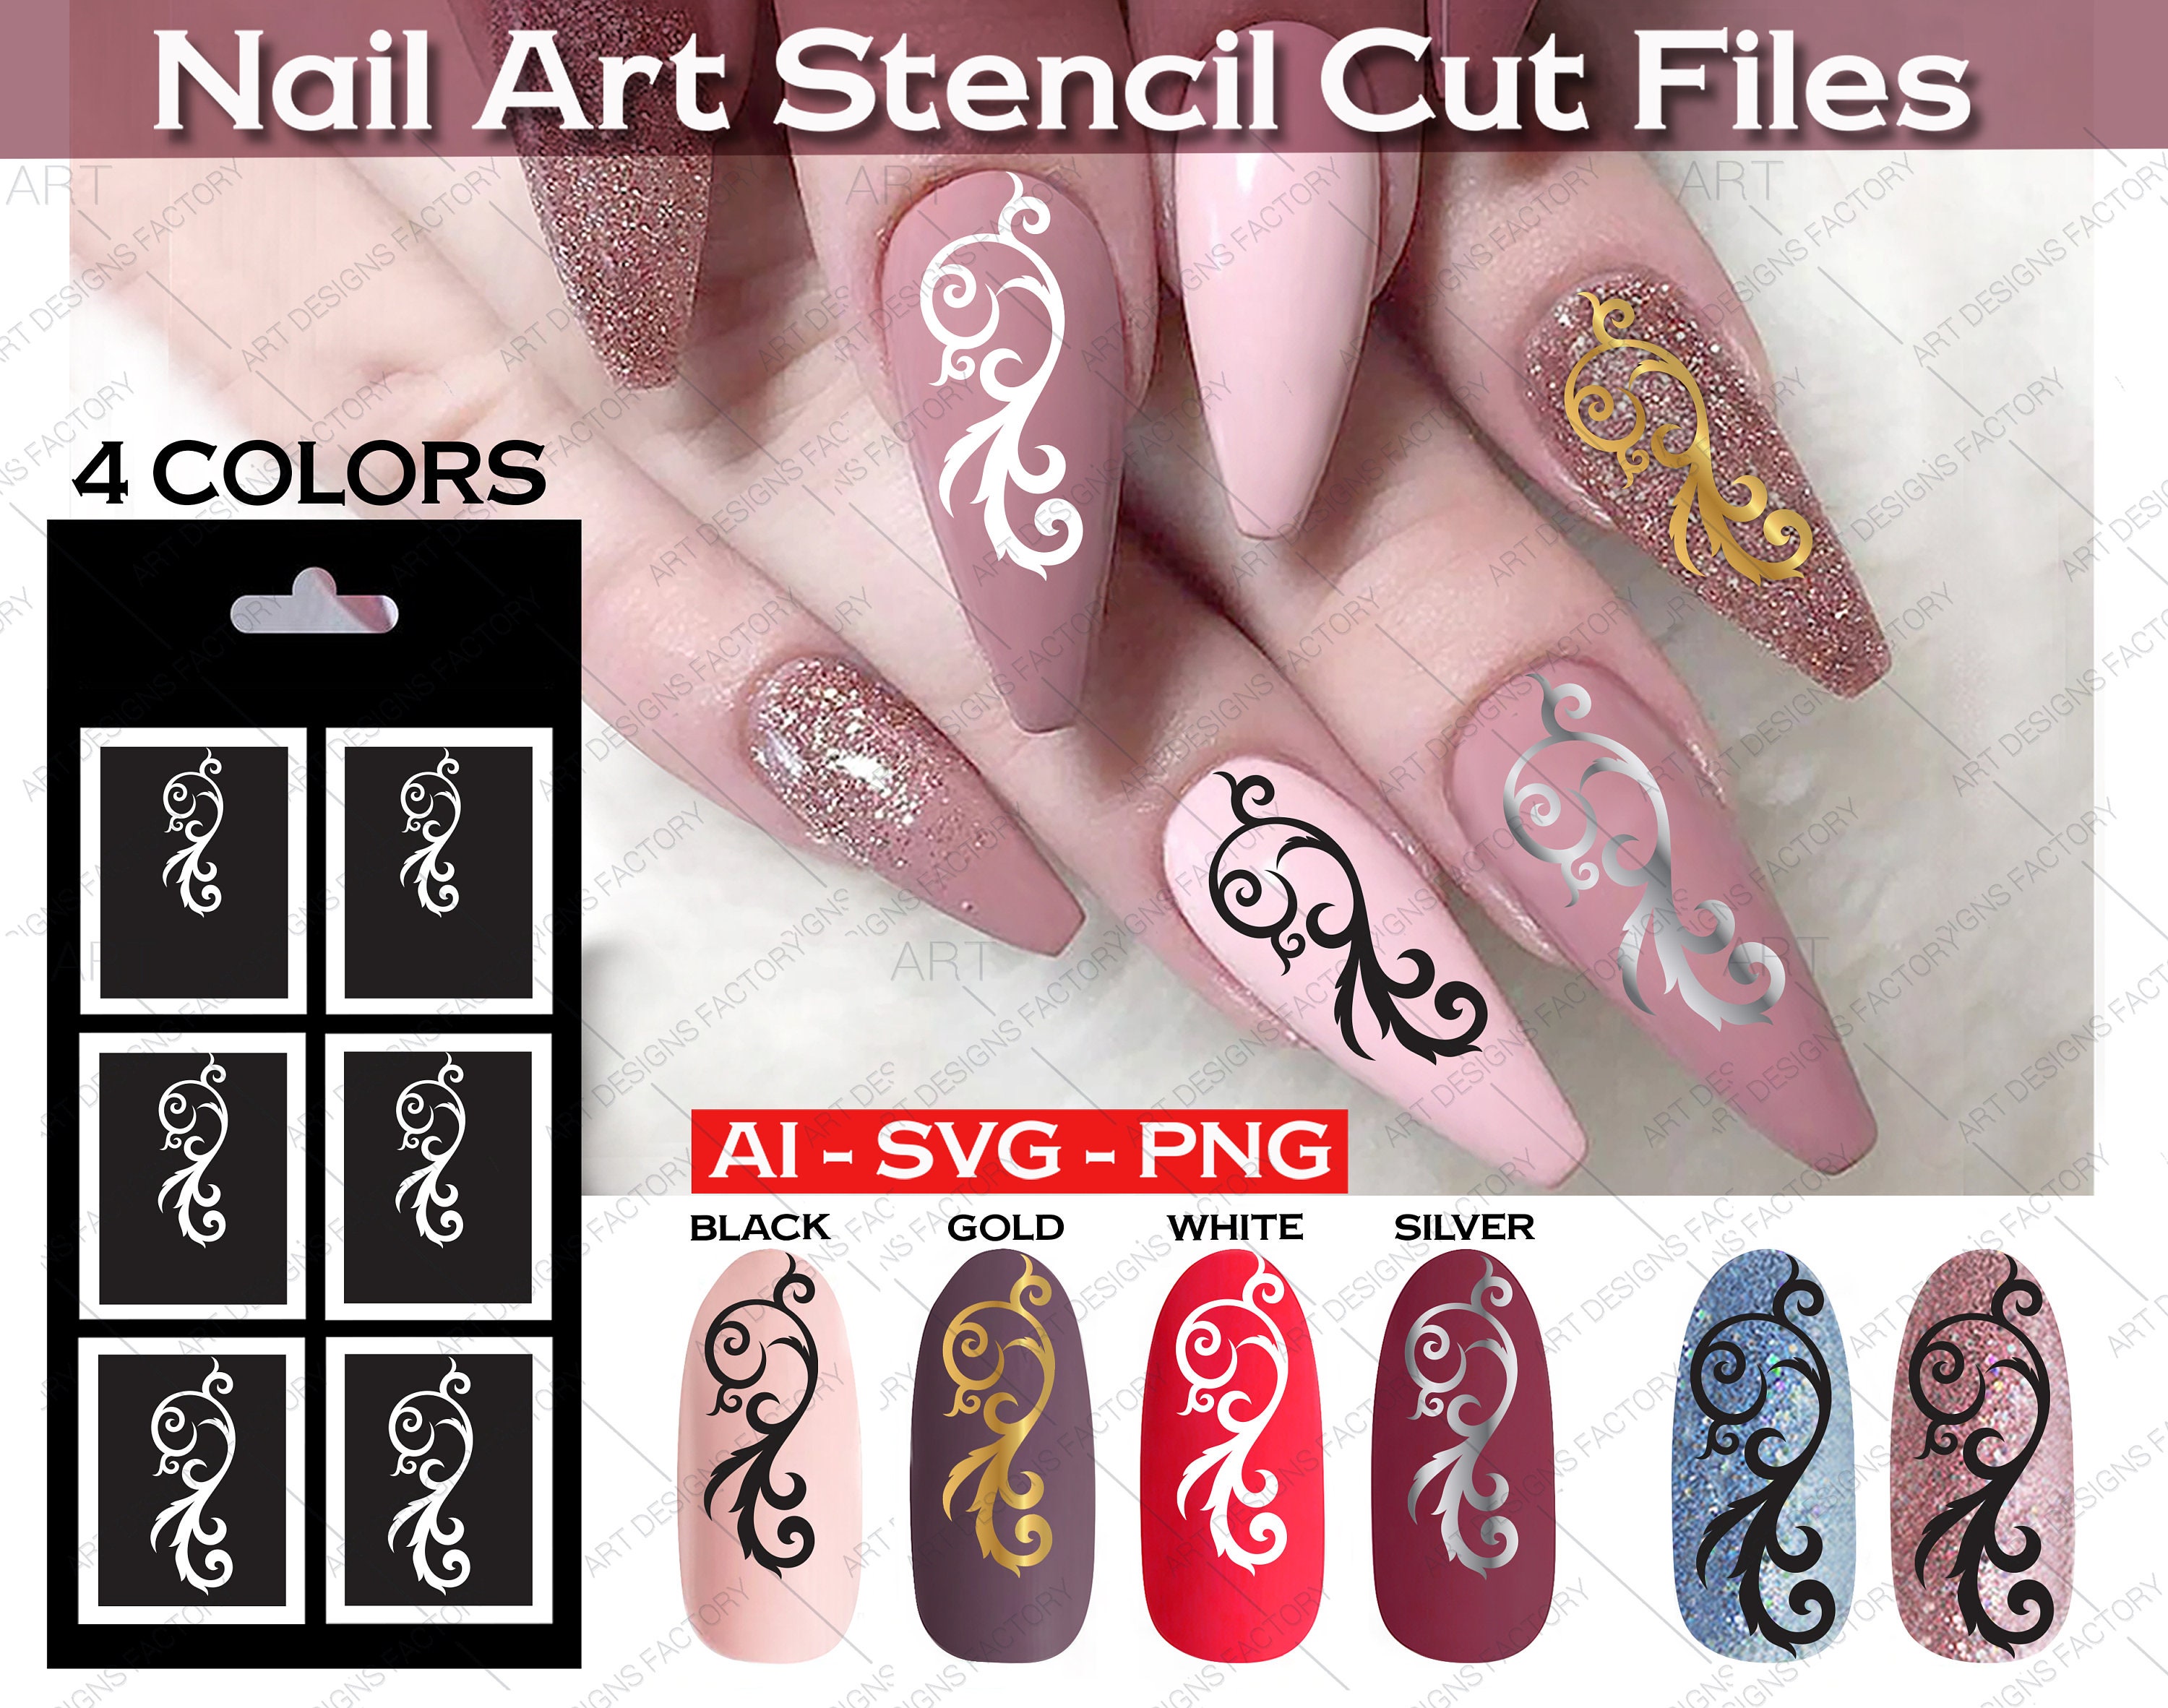 1. Nail Art Stencil and Stamp Set - wide 1